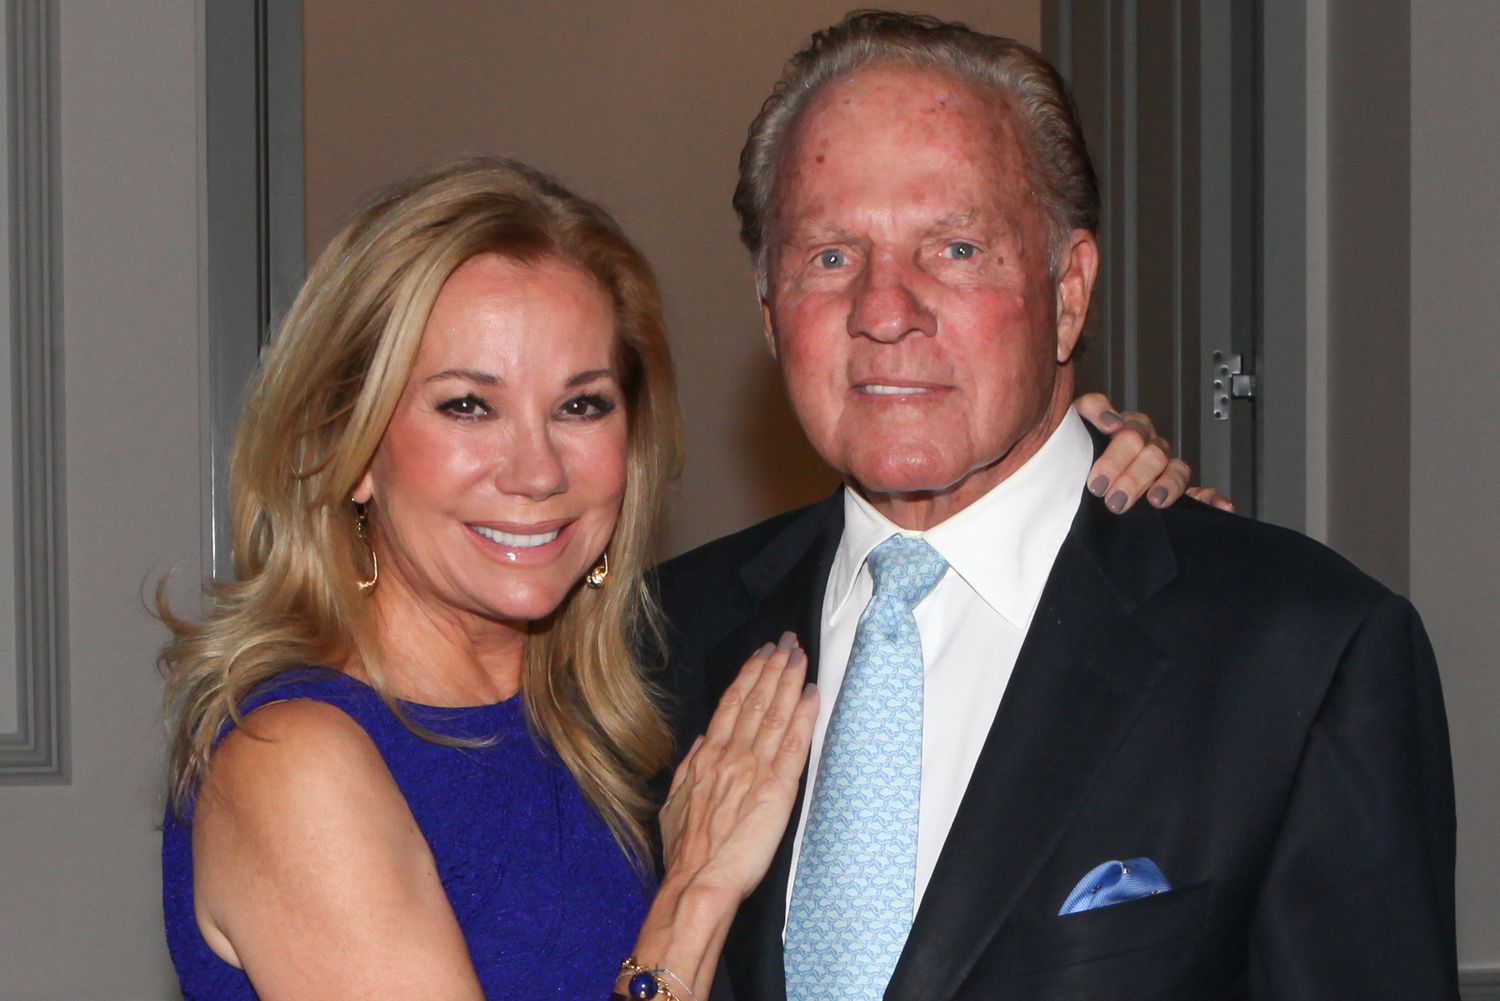 Kathie Lee and Frank Gifford